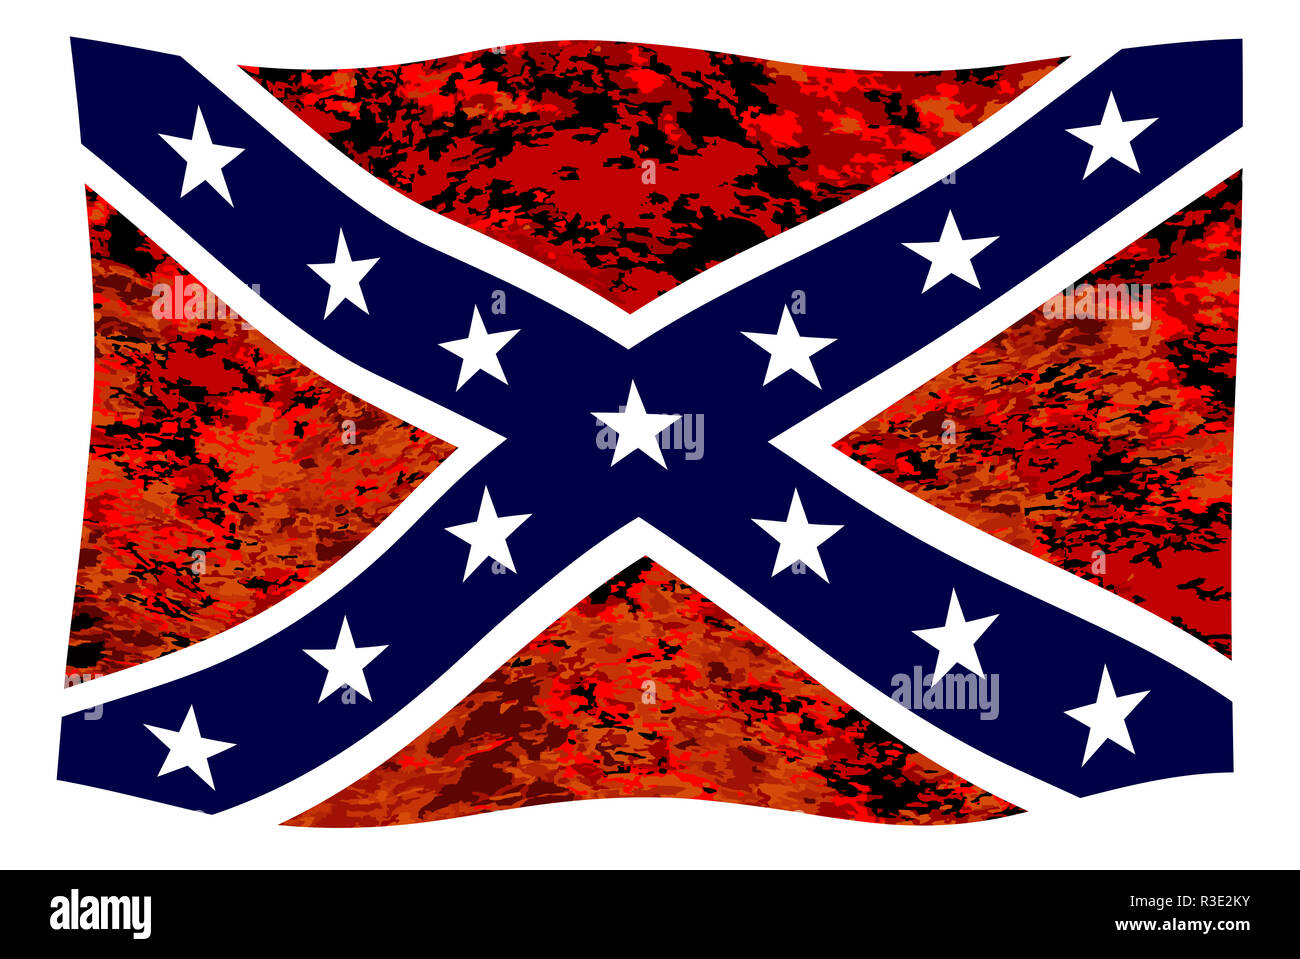 The flag of the confederates during the American Civil War with fire background fluttering Stock Photo